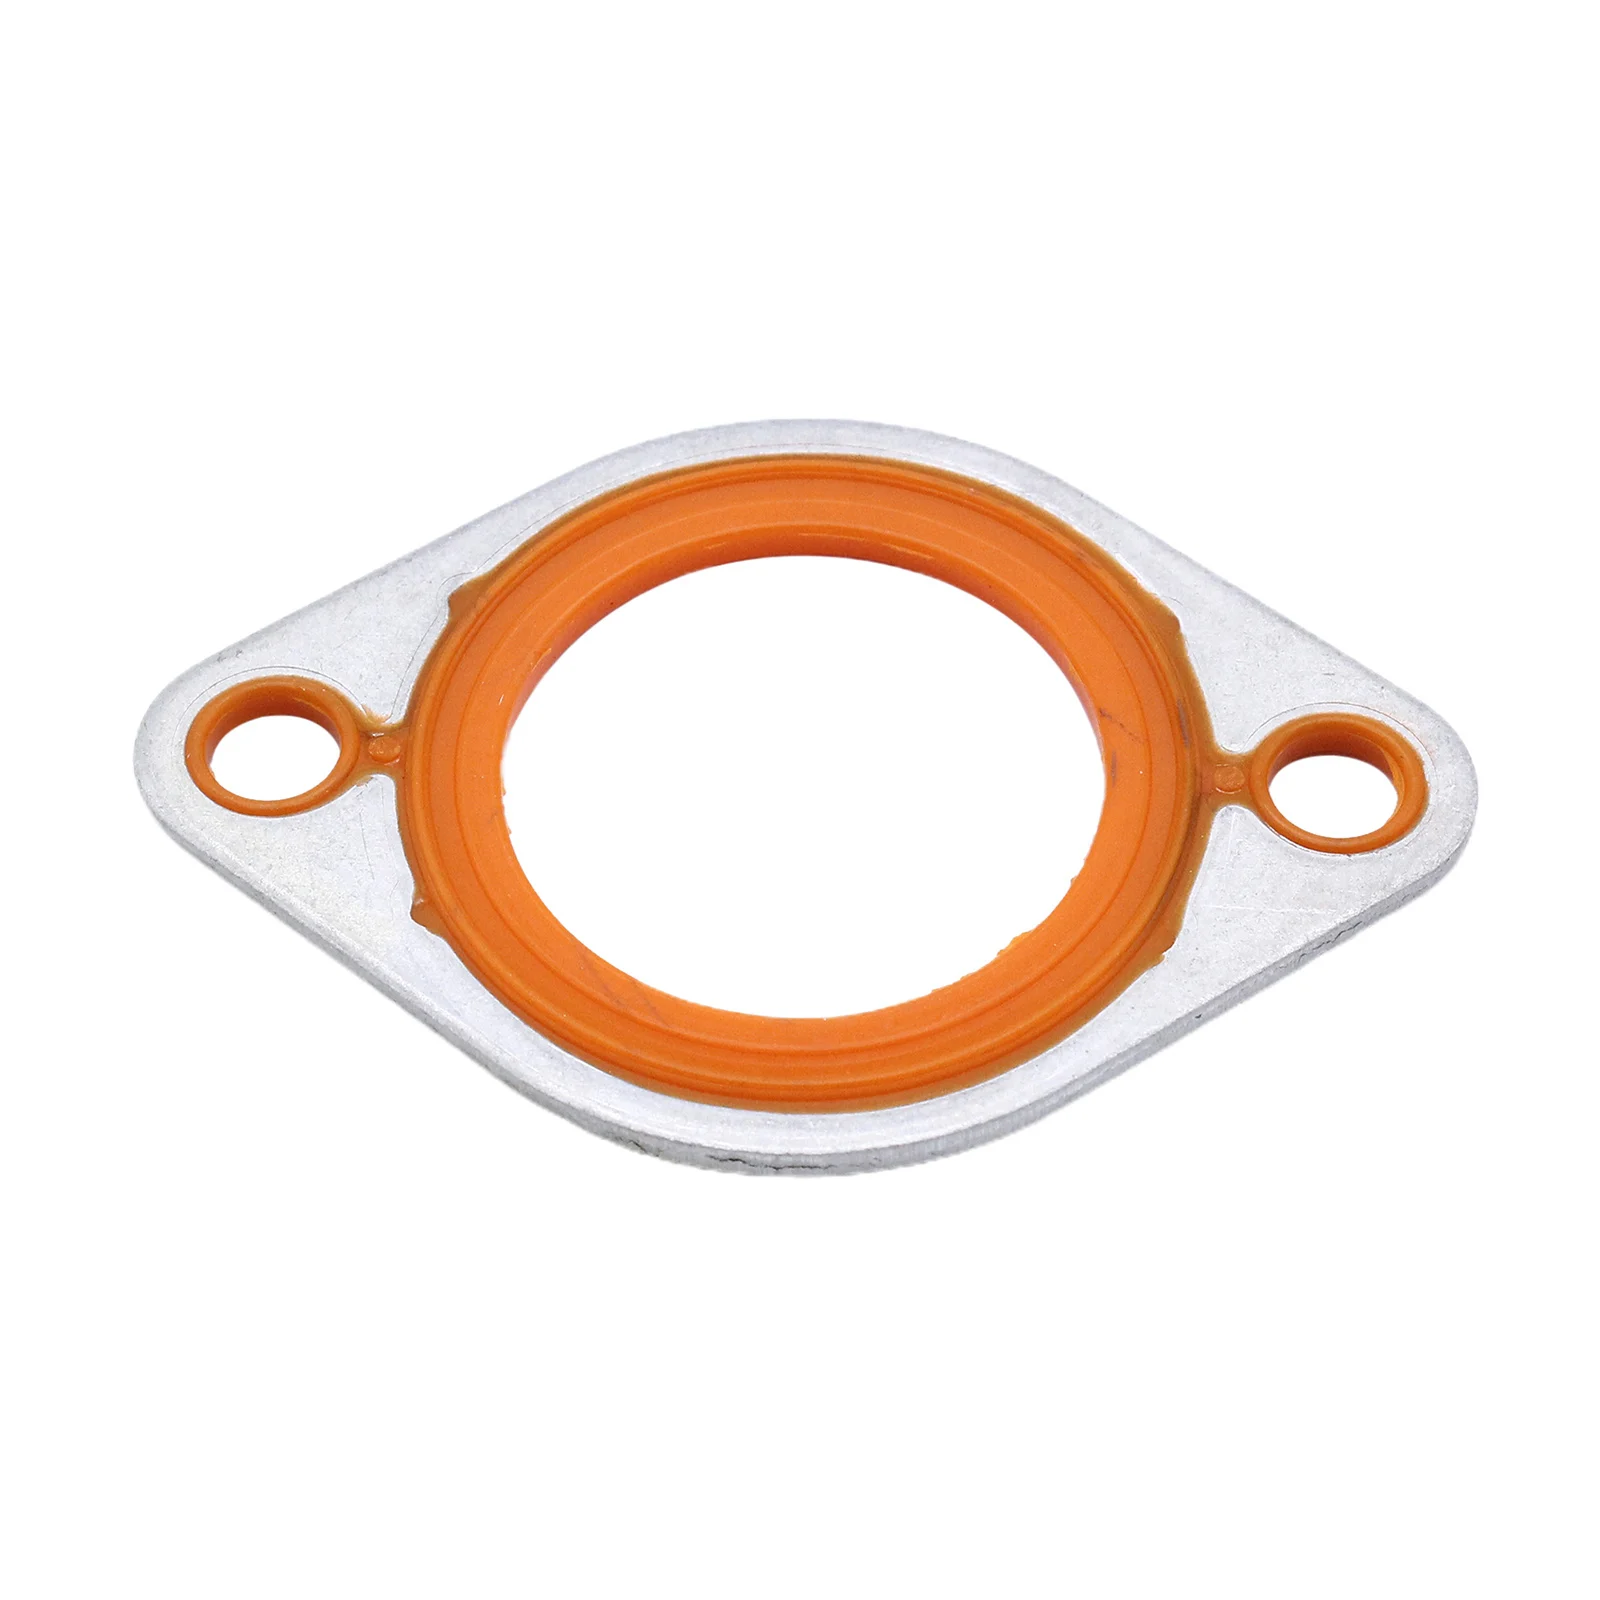 

Thermostat Water Neck Housing Gasket for Chevy SBC BBC 283 327 350 383 400 454 502 Aluminum/Silicone Replacement Parts